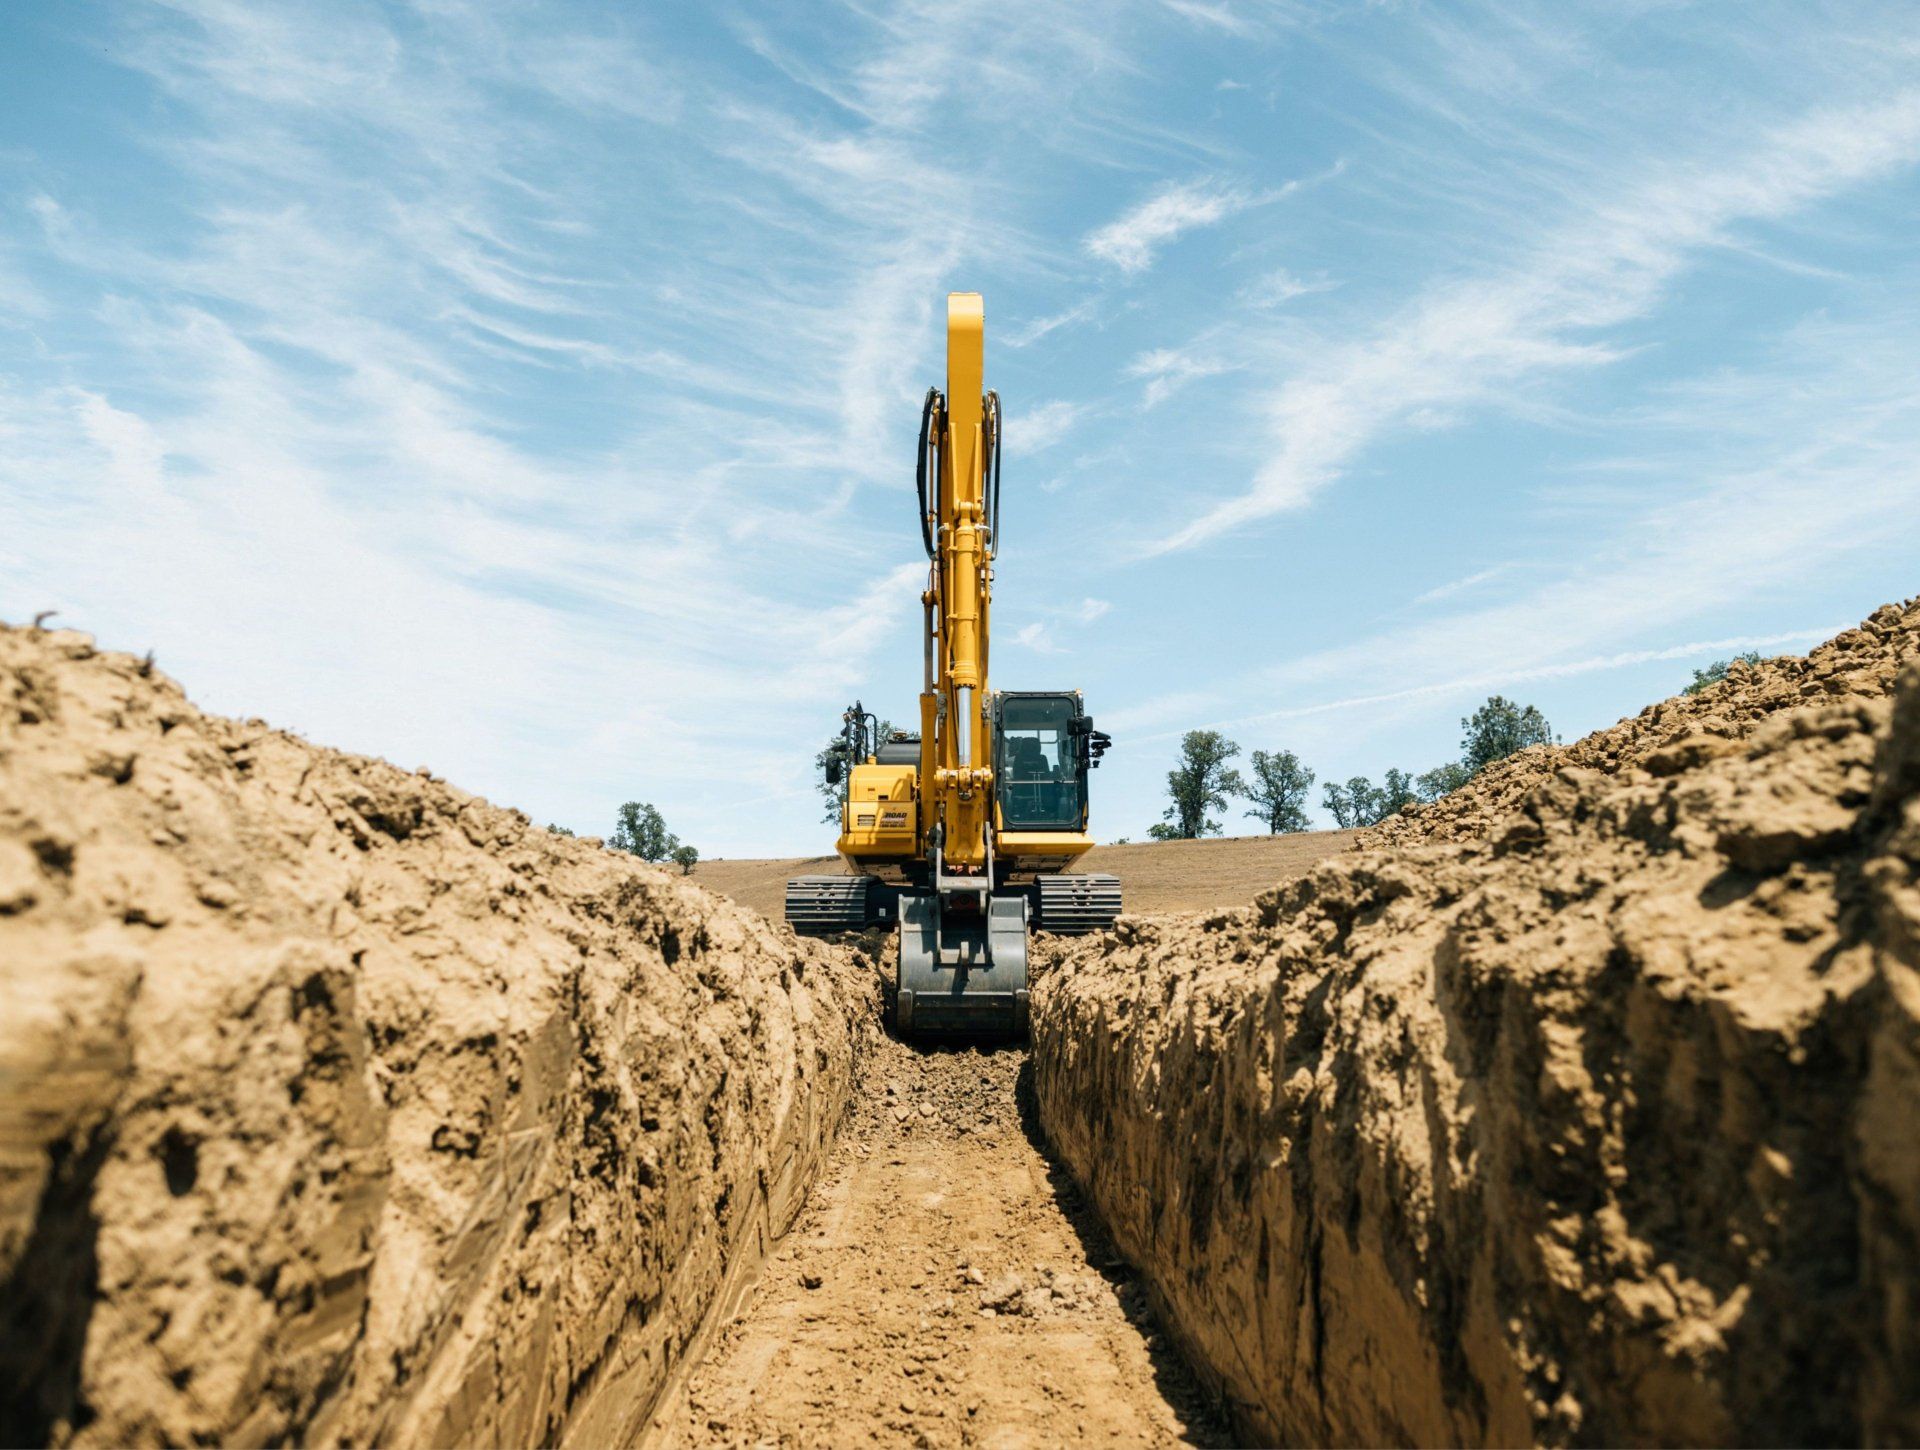 a yellow excavator is digging a trench in the dirt